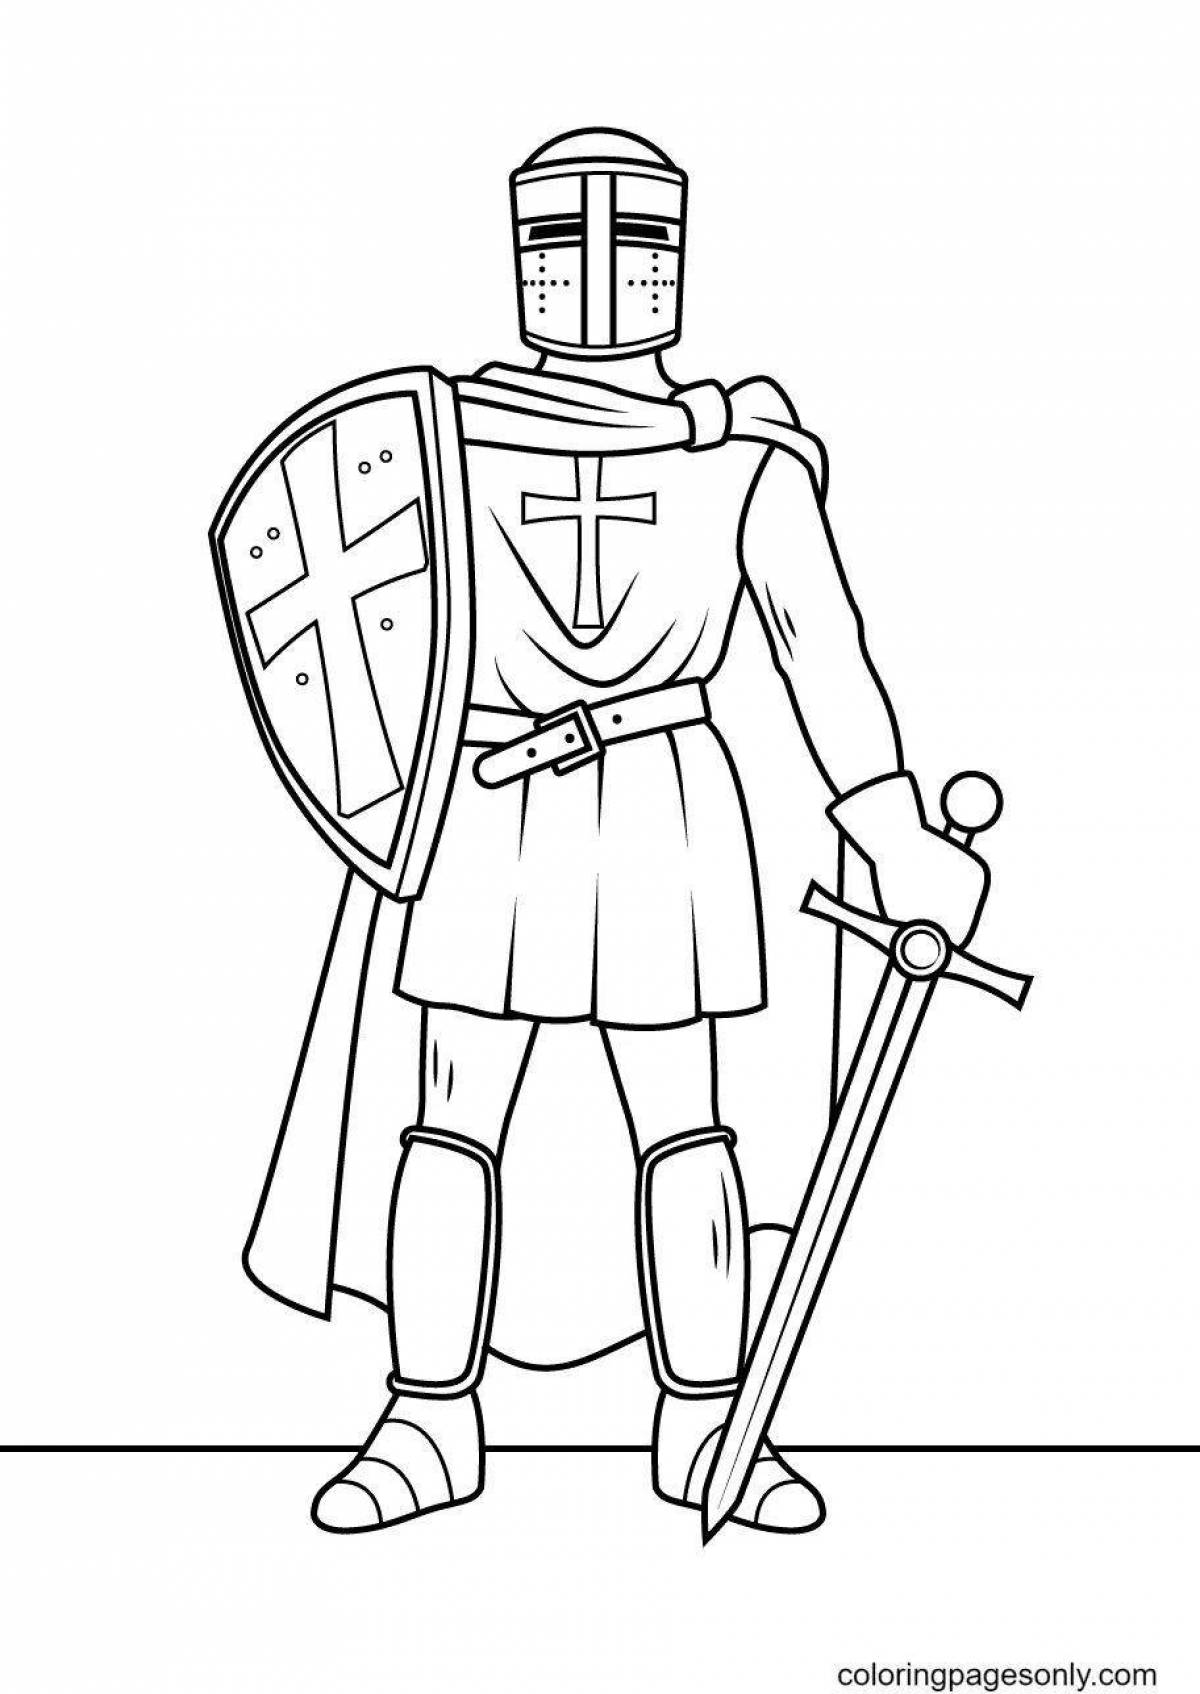 Crazy Crusader Coloring Pages